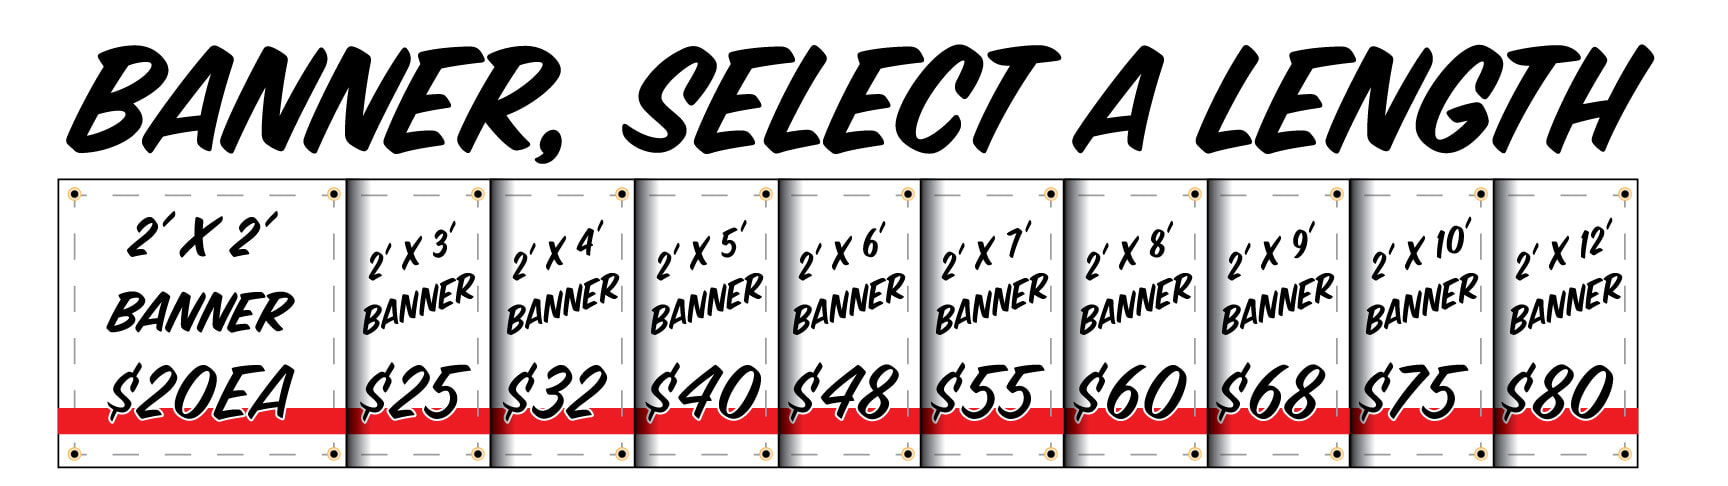 2 foot outdoor banner select a length 